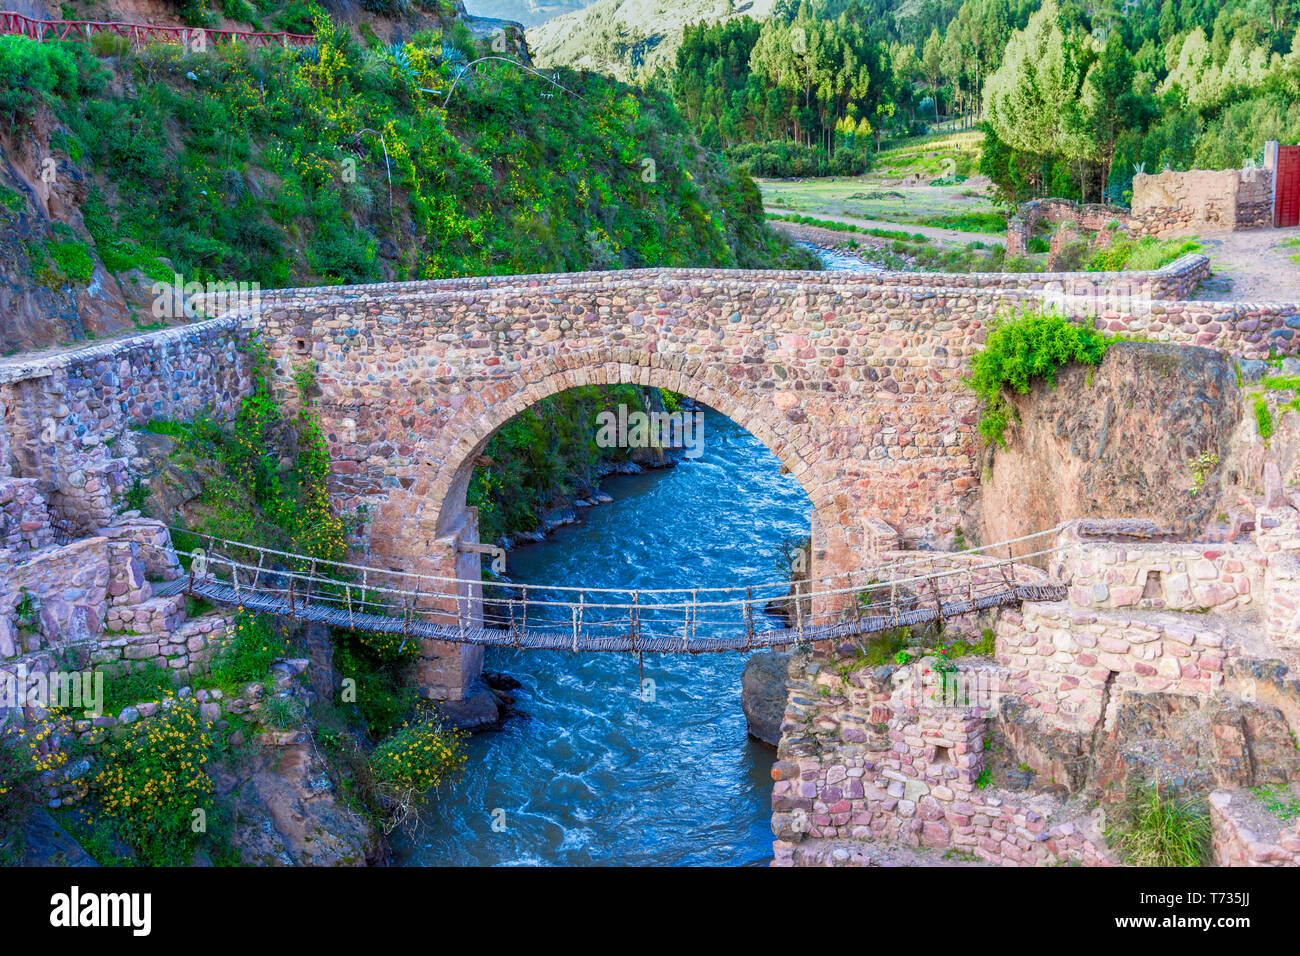 Checacupe, Cusco, Peru: The Colonial Bridge of Checacupe one of the most incredible attractions of this place, and the Inca Bridge built of straw - Qu Stock Photo